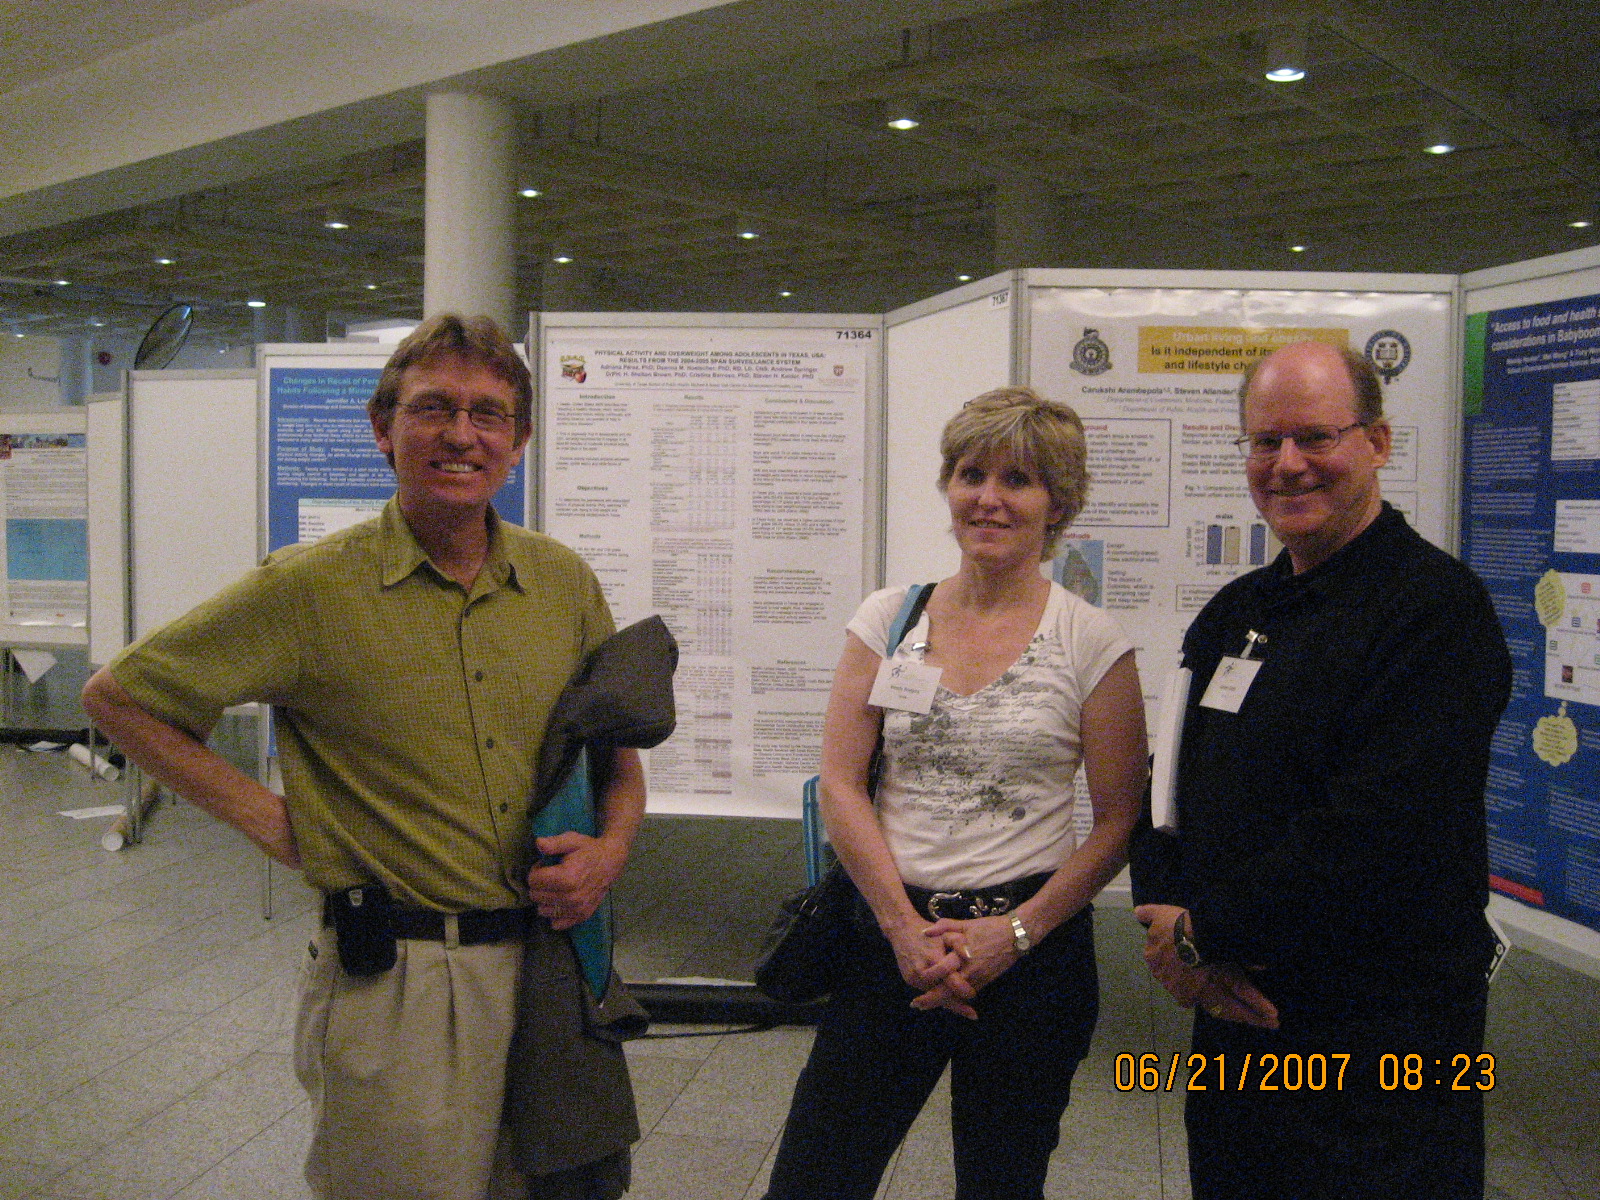 [Ron,+Wendy+and+Gaston+at+posters+ISBNPA+2007.jpg]